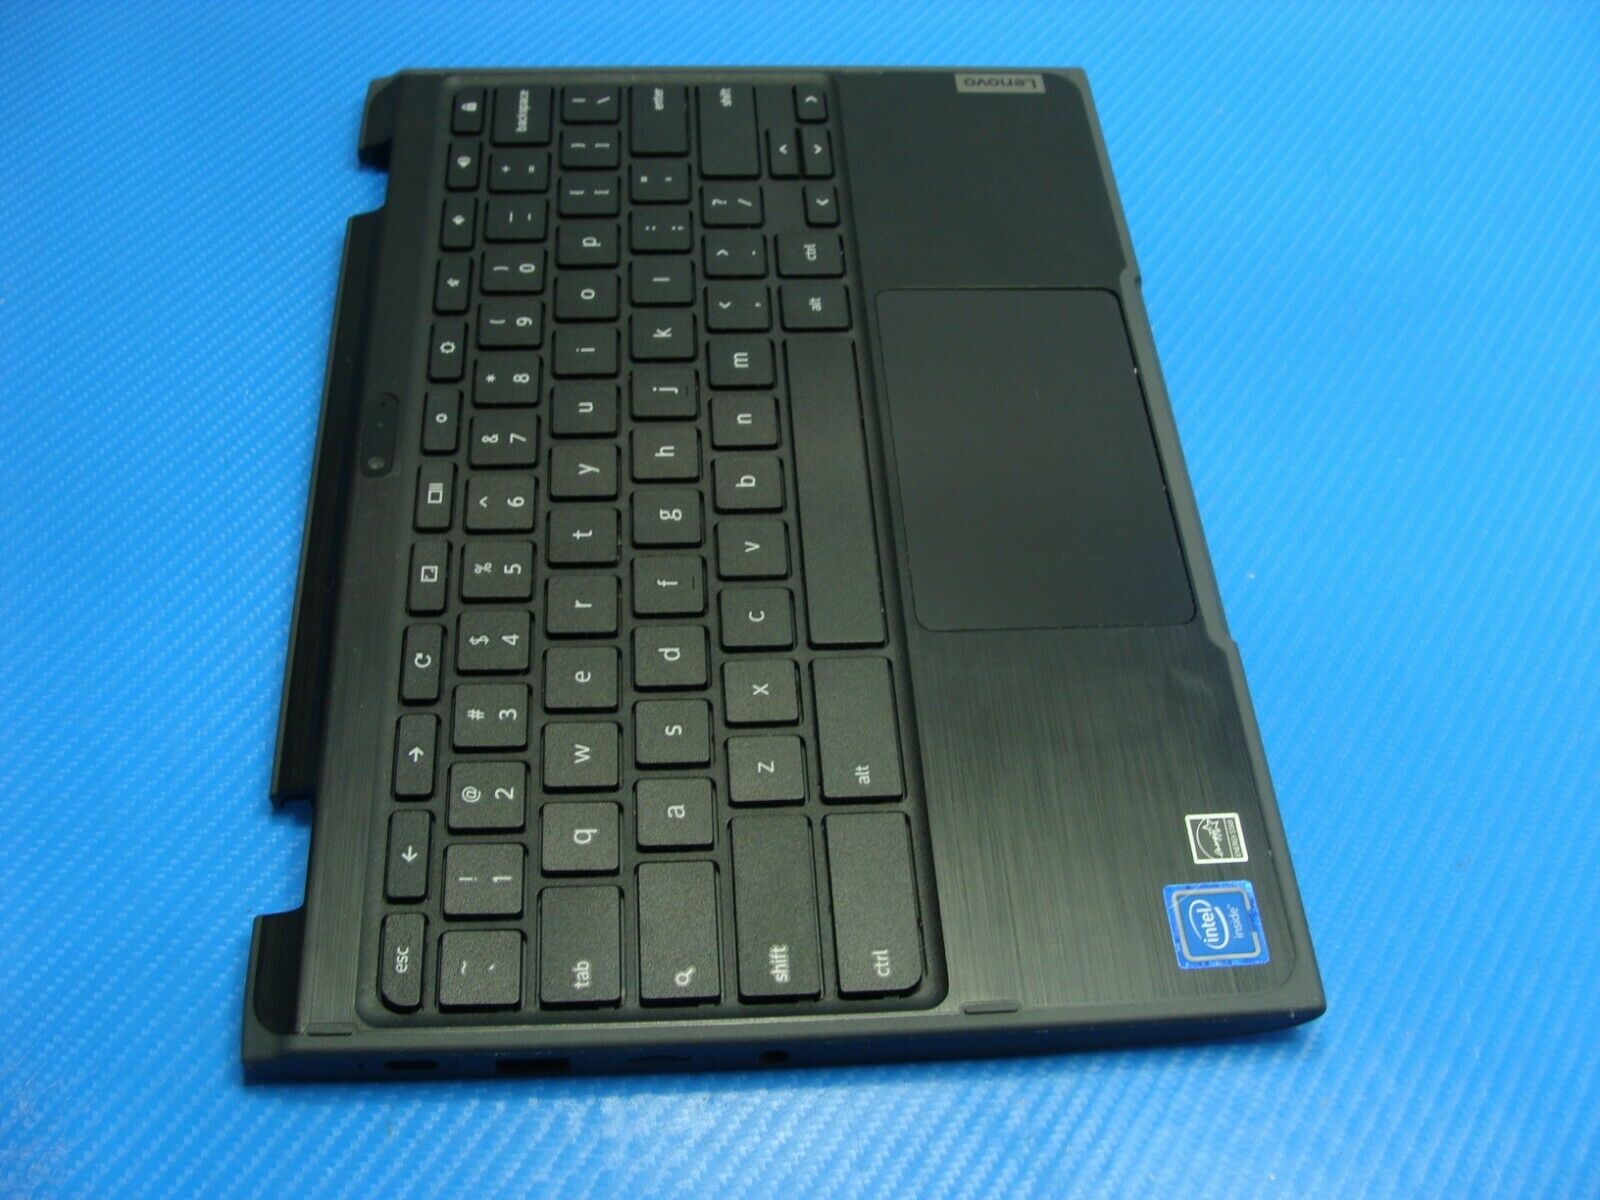 Lenovo Chromebook 11.6 300e 81MB 2nd Gen Palmrest Keyboard Touchpad 5CB0T79500 - Laptop Parts - Buy Authentic Computer Parts - Top Seller Ebay